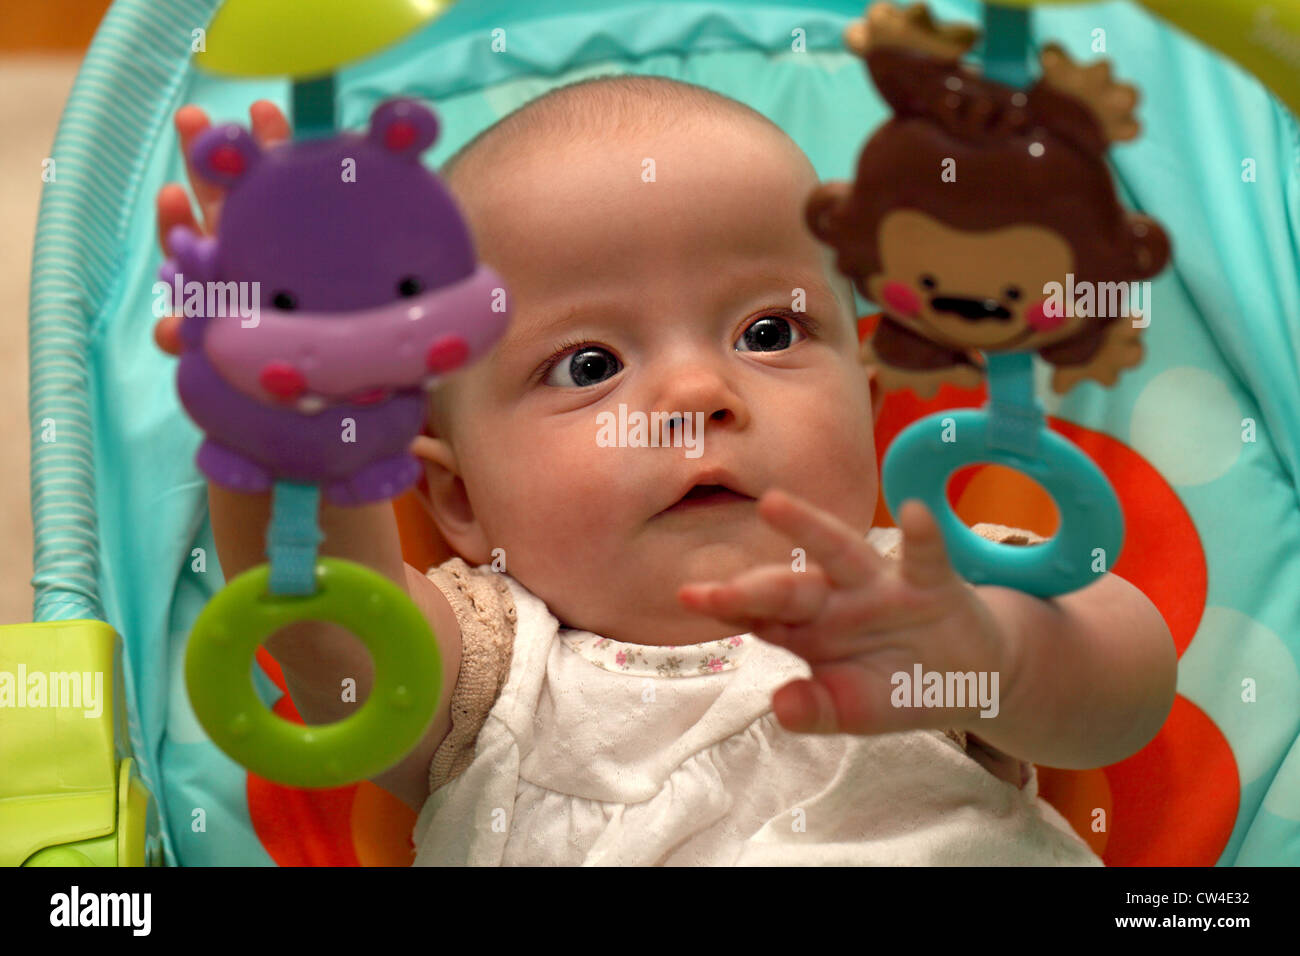 A six month old baby attempting to play with mobiles attached to her baby chair Stock Photo